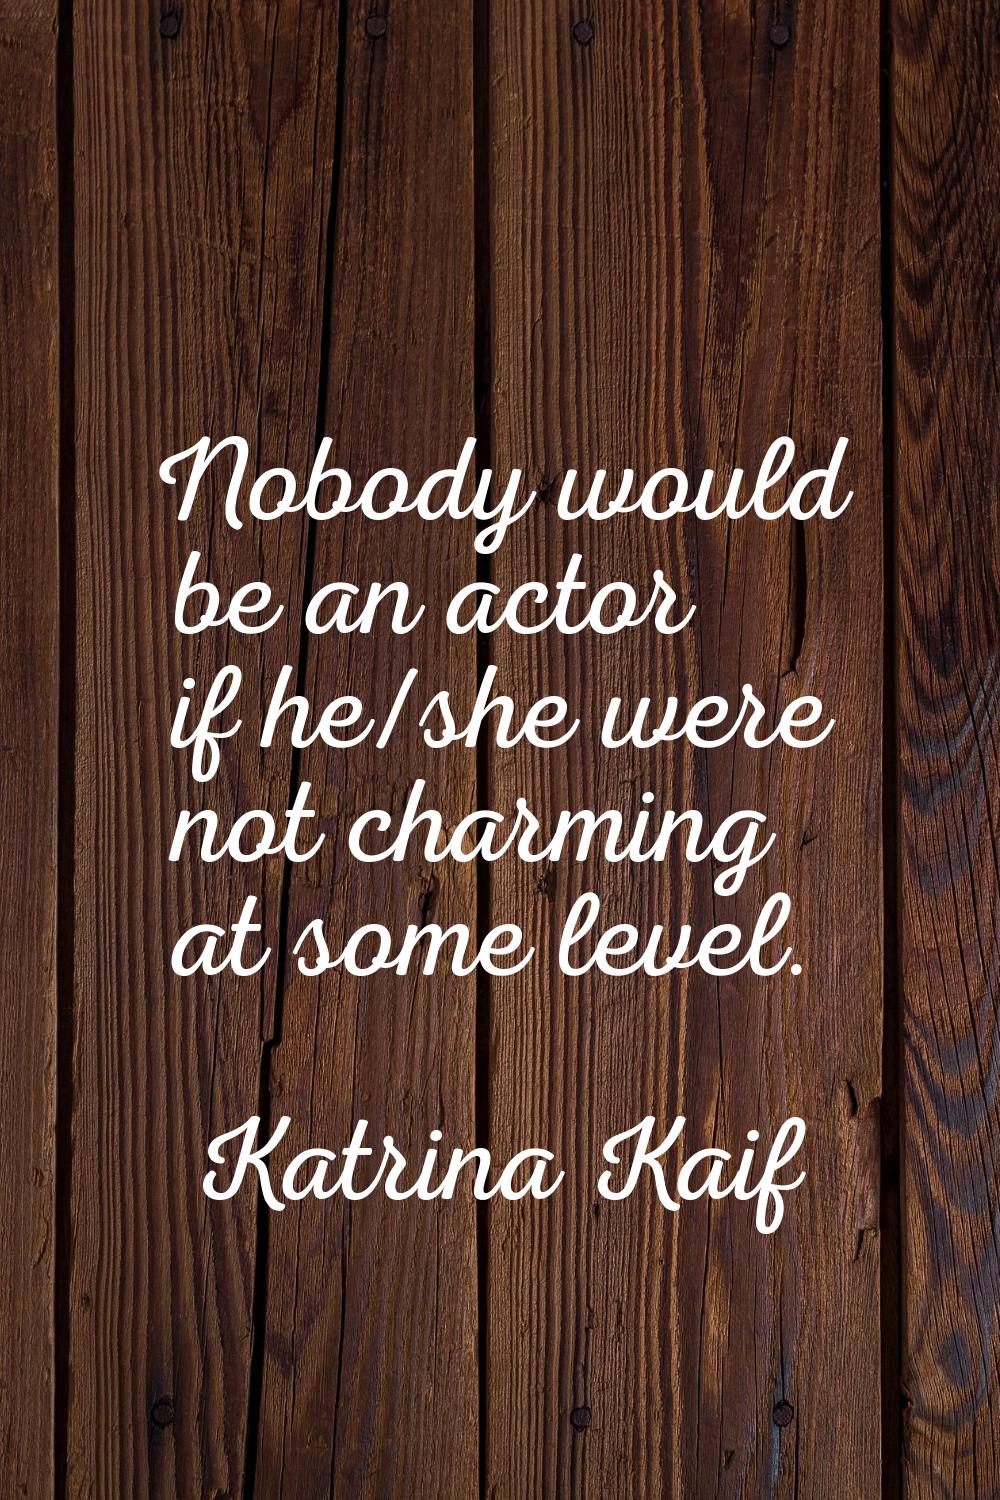 Nobody would be an actor if he/she were not charming at some level.